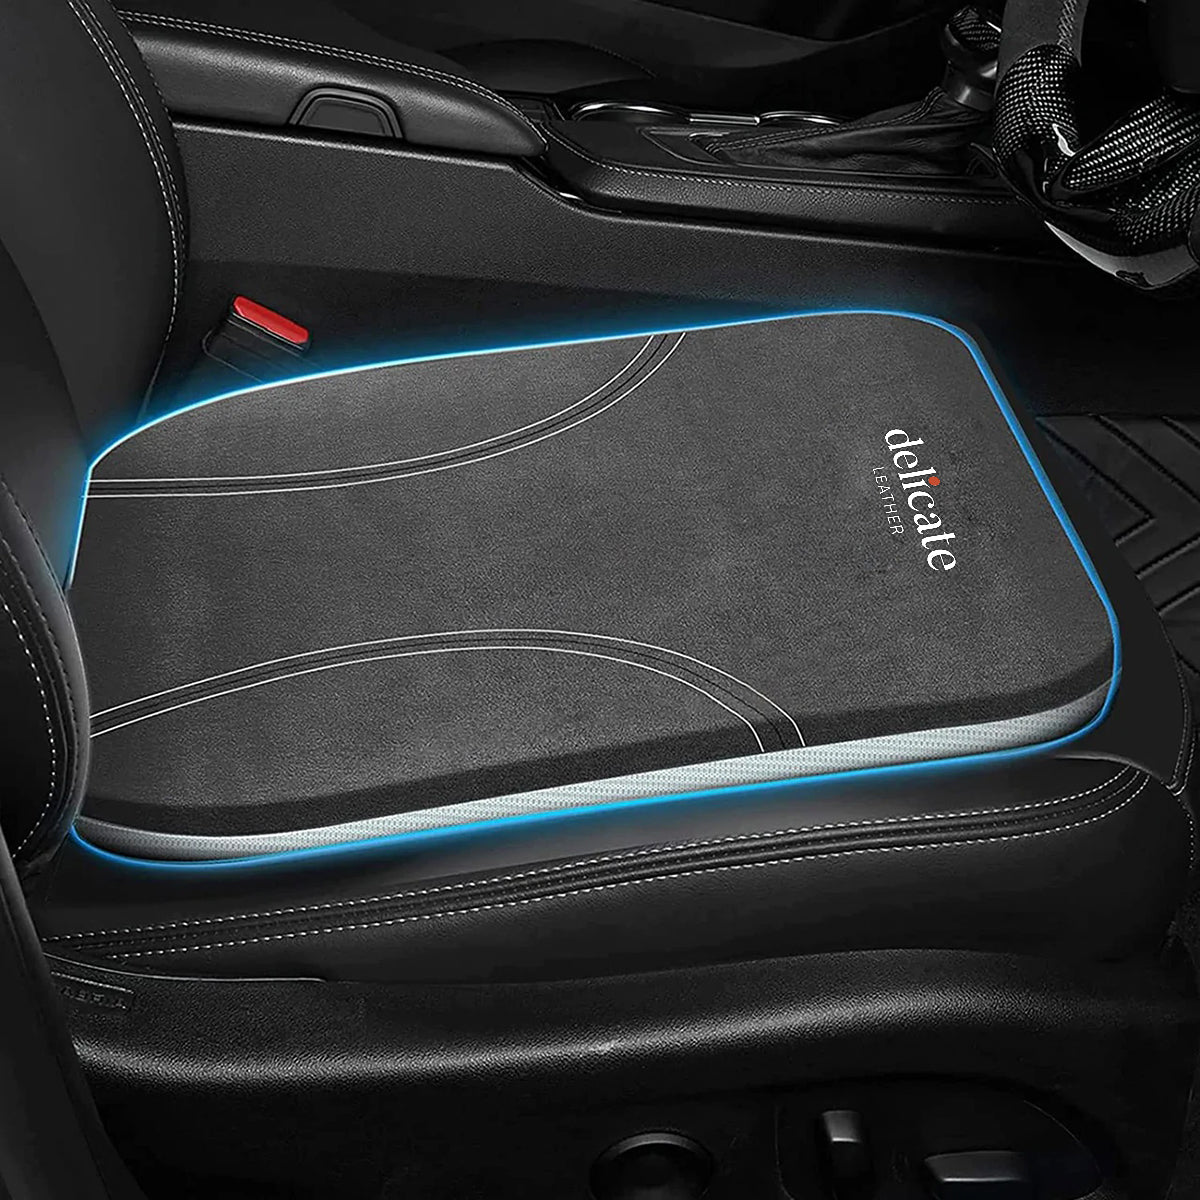 Cadillac Car Seat Cushion: Enhance Comfort and Support for Your Drive